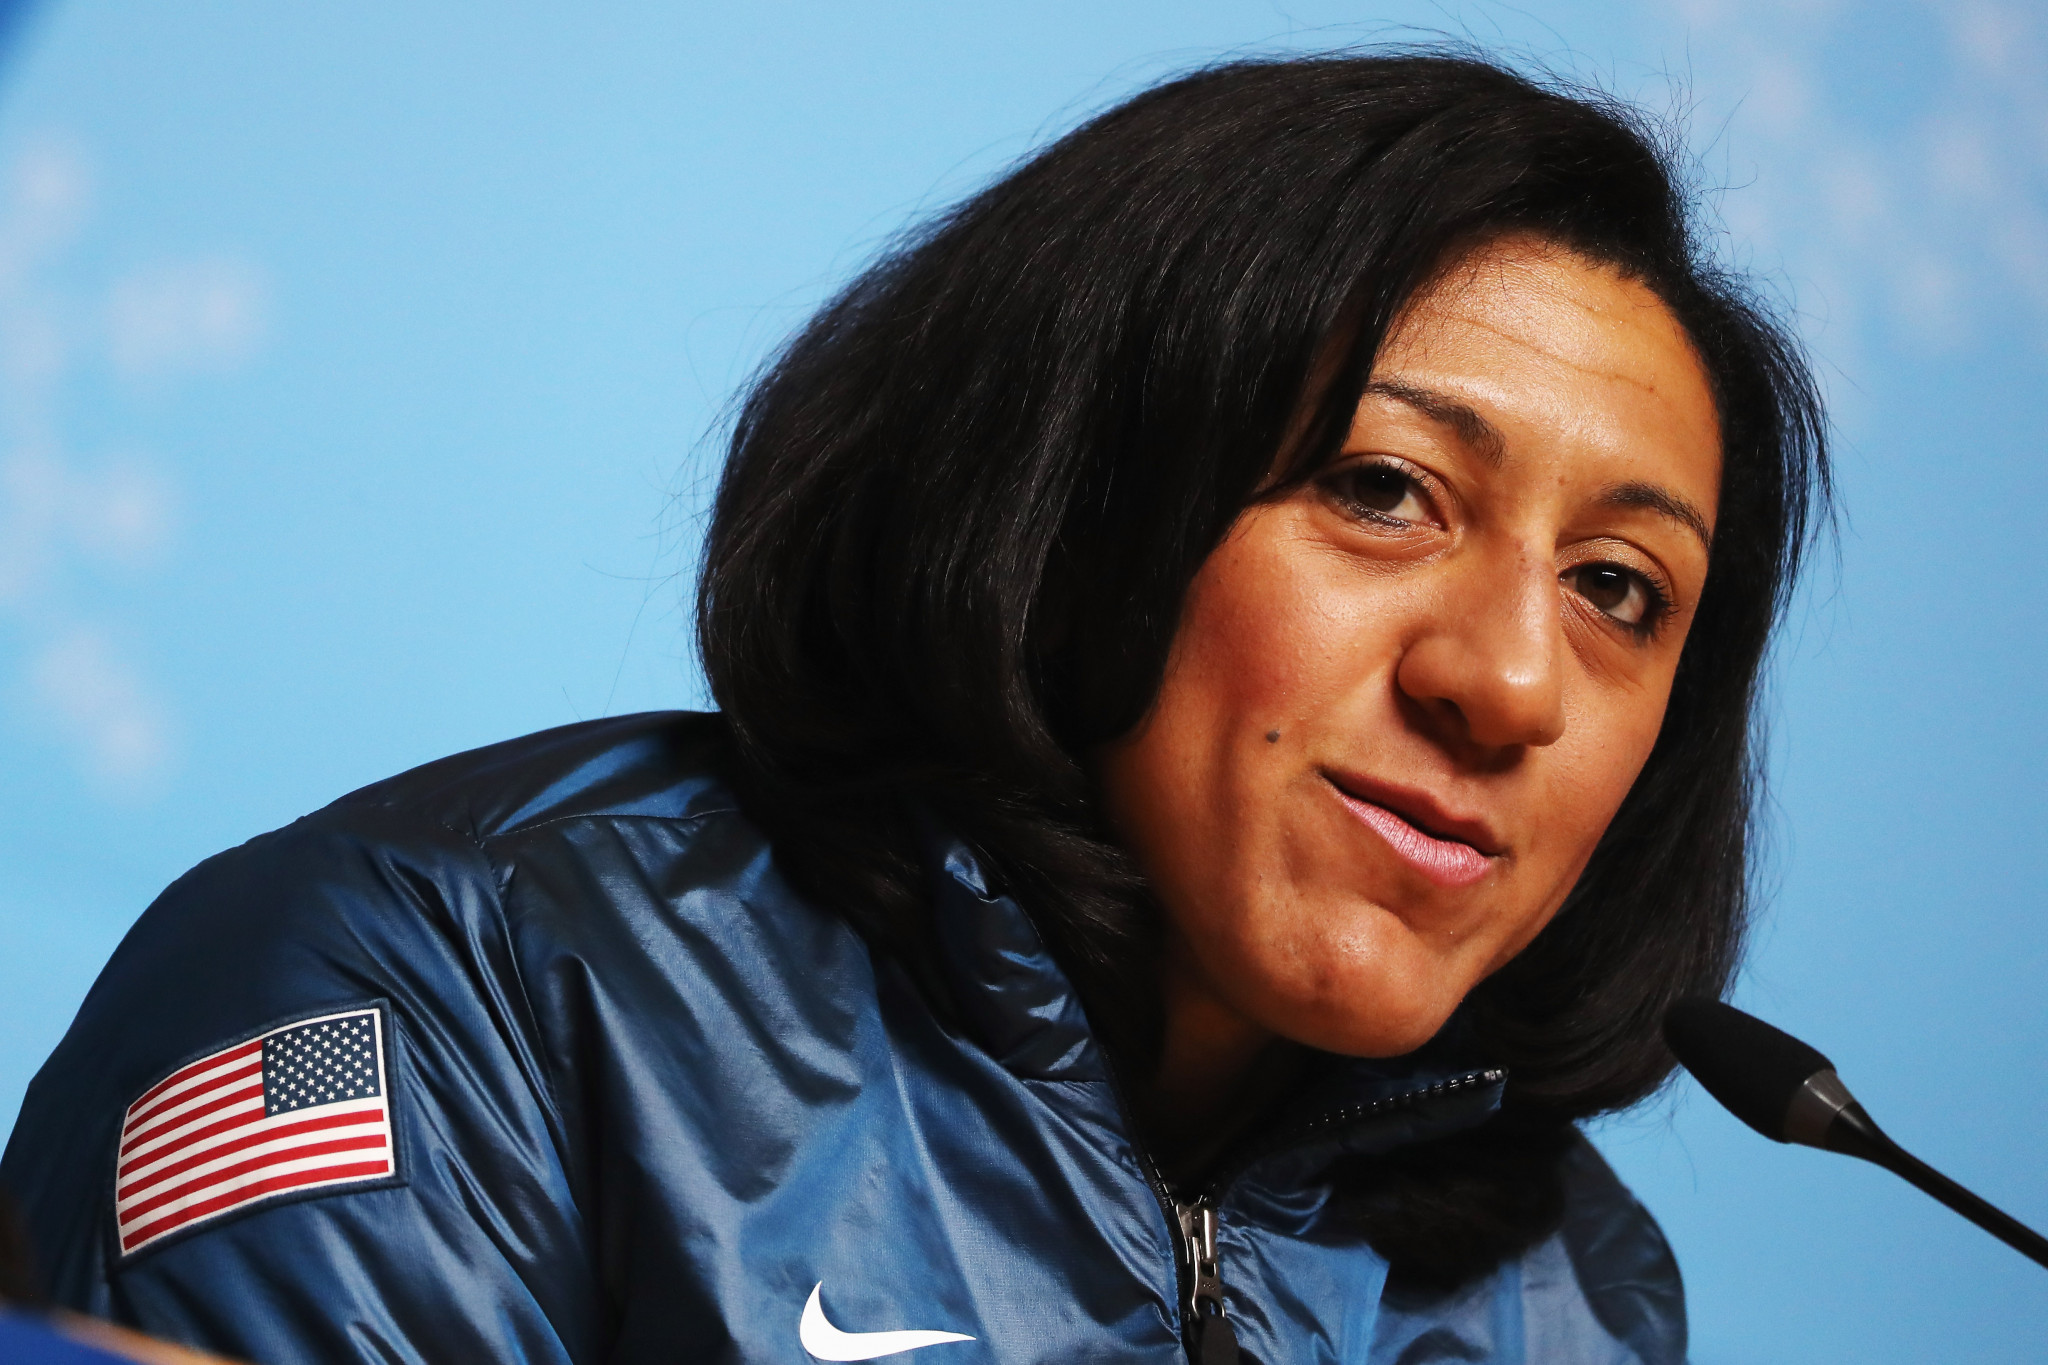 Elana Meyers Taylor won silver at the 2018 Winter Olympic Games in Pyeongchang ©Getty Images